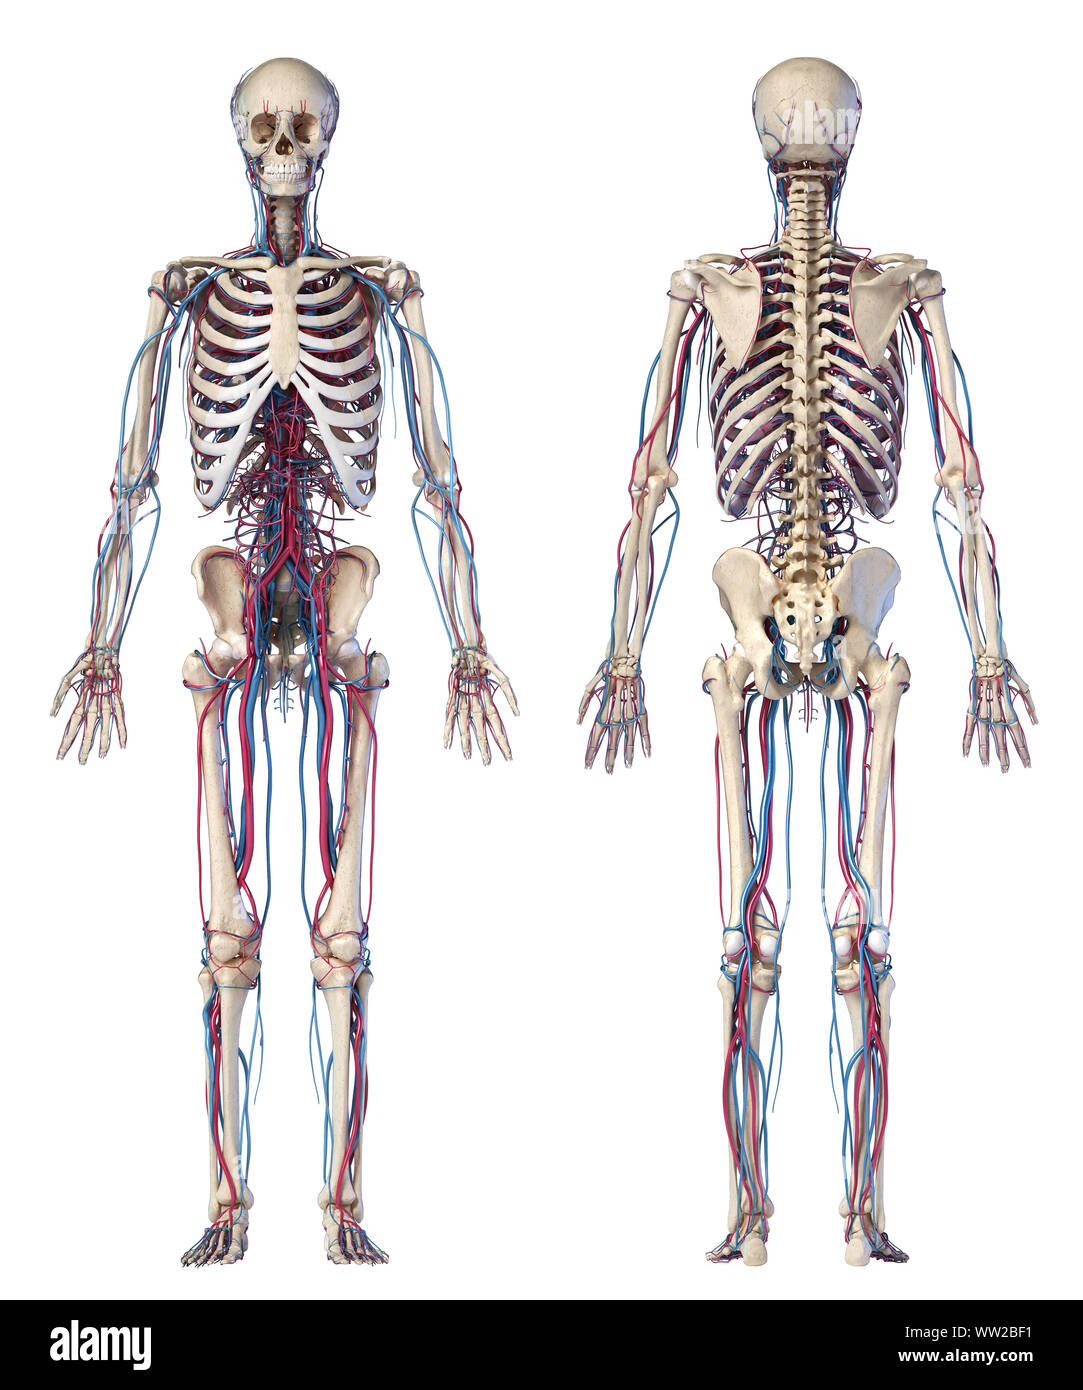 Human body anatomy. 3d illustration of Skeletal and cardiovascular systems. Front and Rear views. On white background. Stock Photo